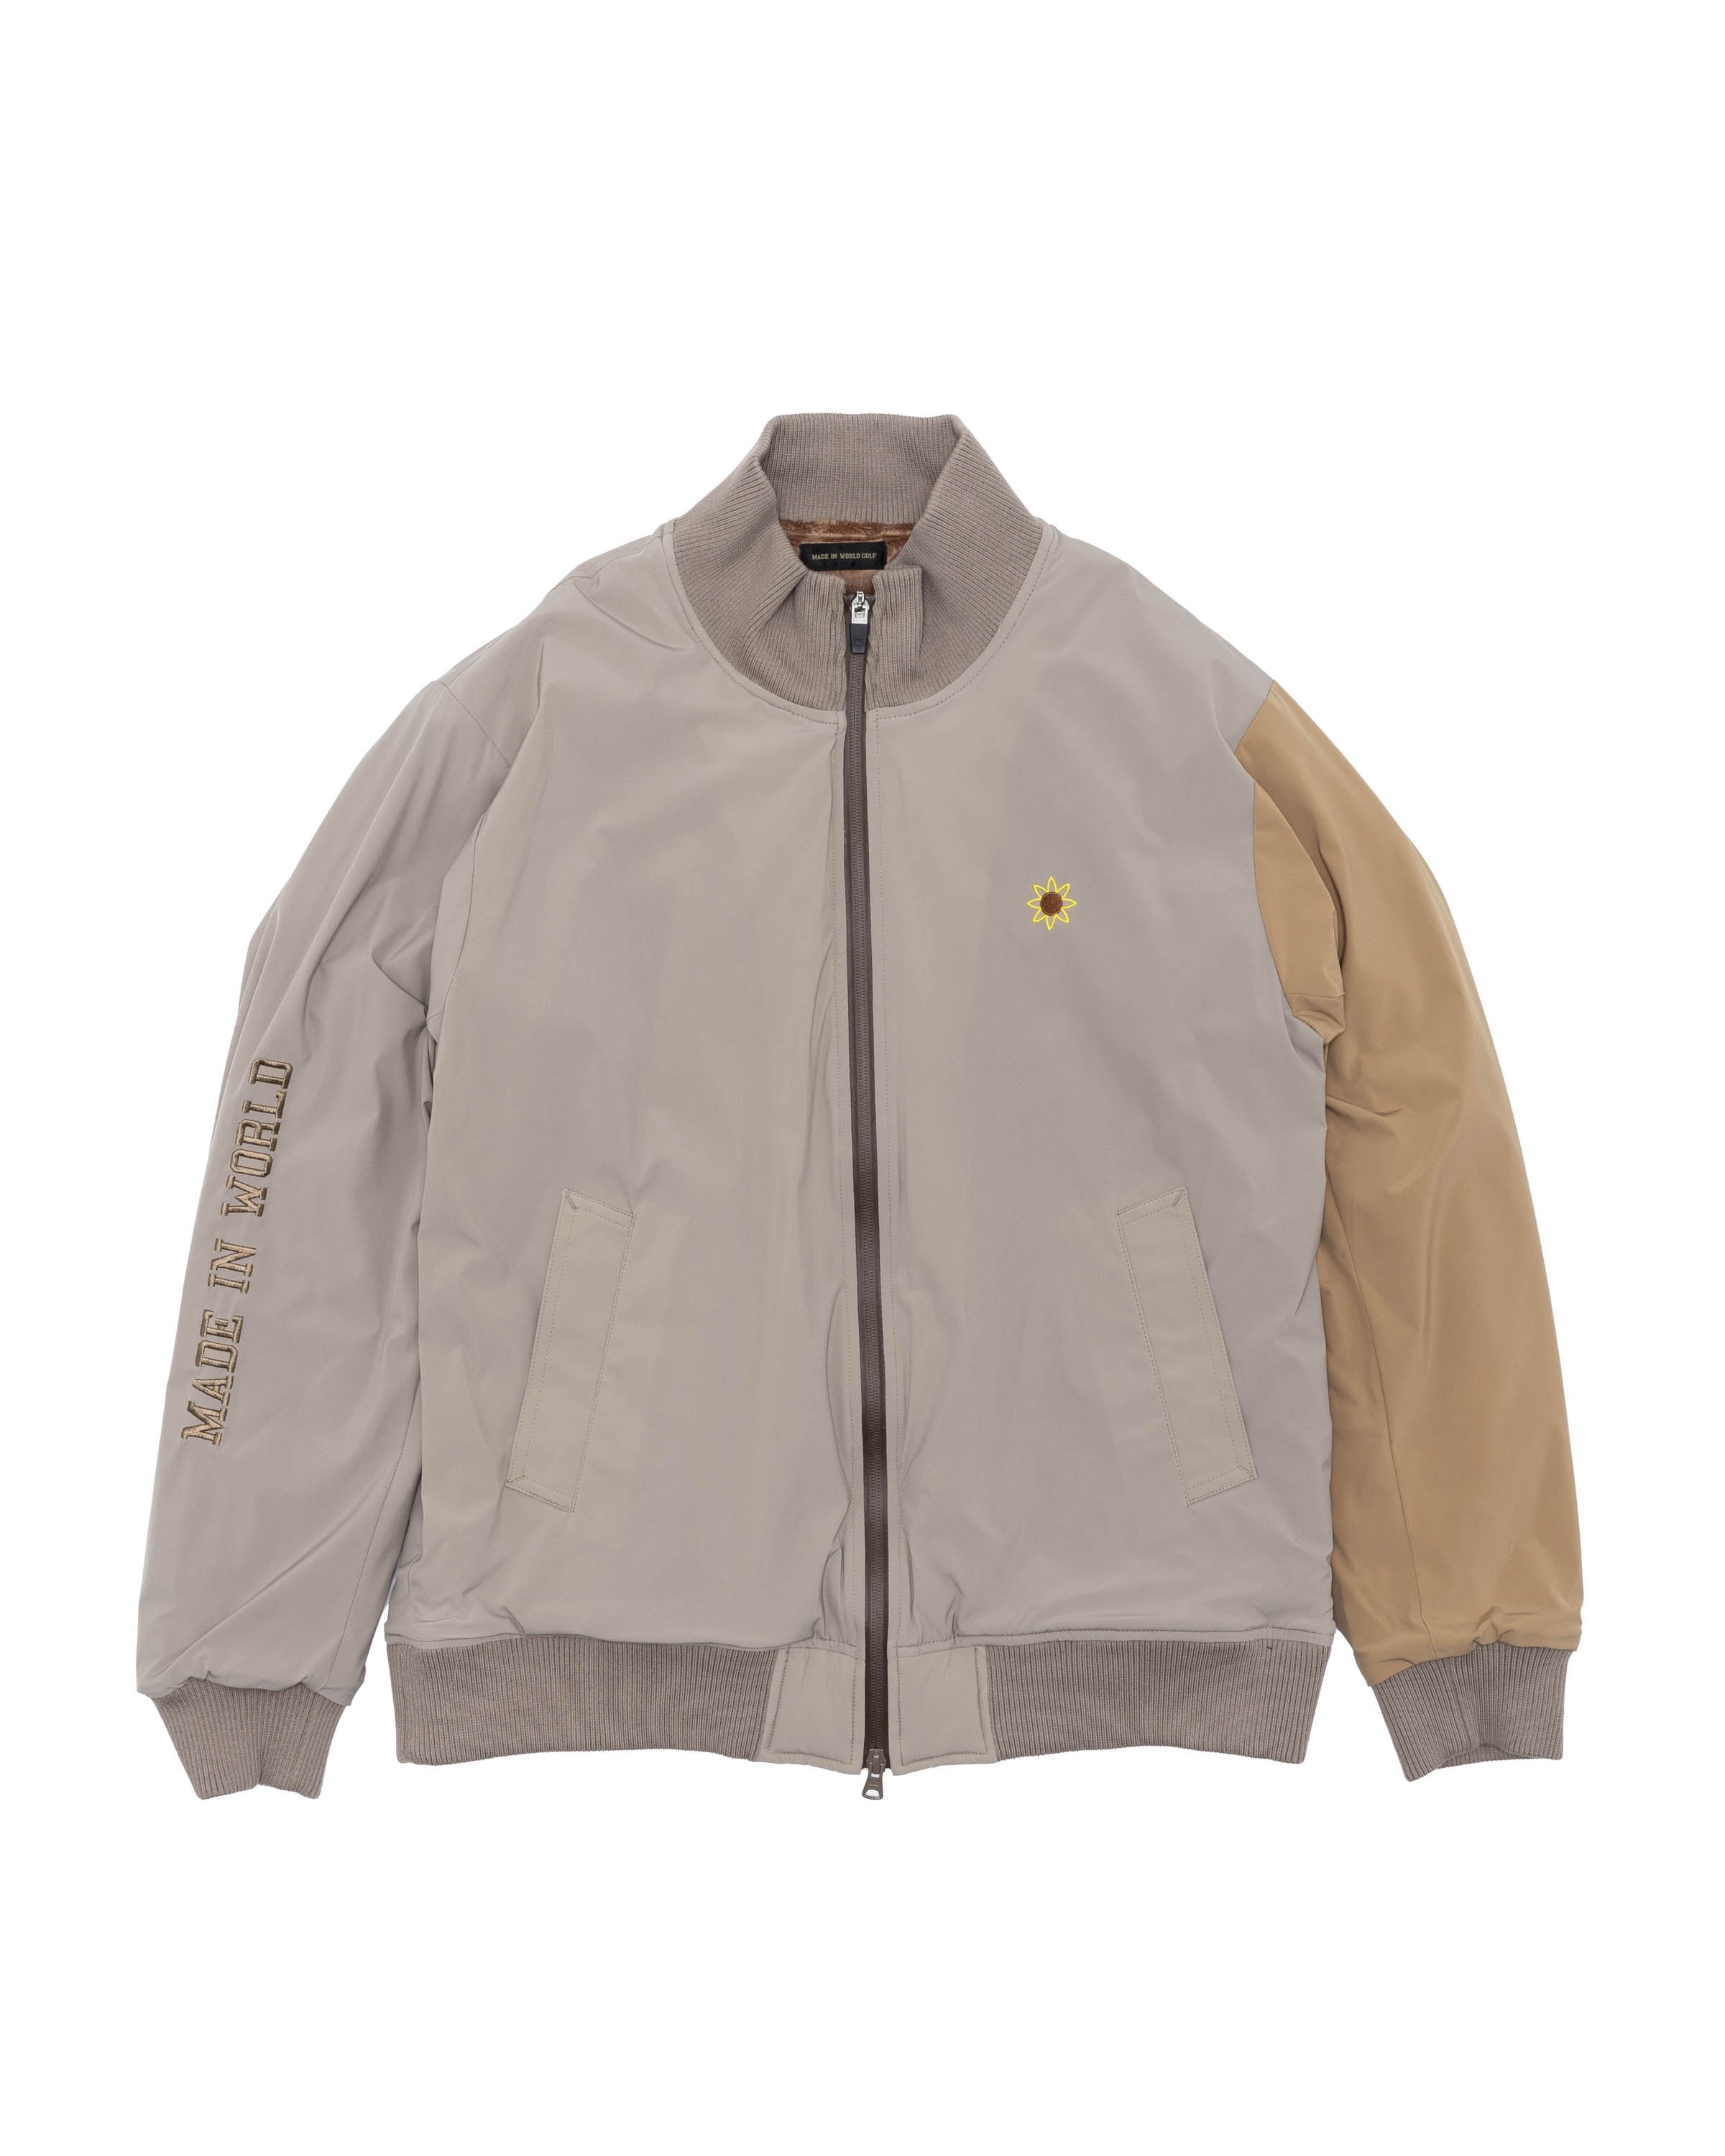 <img class='new_mark_img1' src='https://img.shop-pro.jp/img/new/icons14.gif' style='border:none;display:inline;margin:0px;padding:0px;width:auto;' />FUR BLOUSON<br />beige